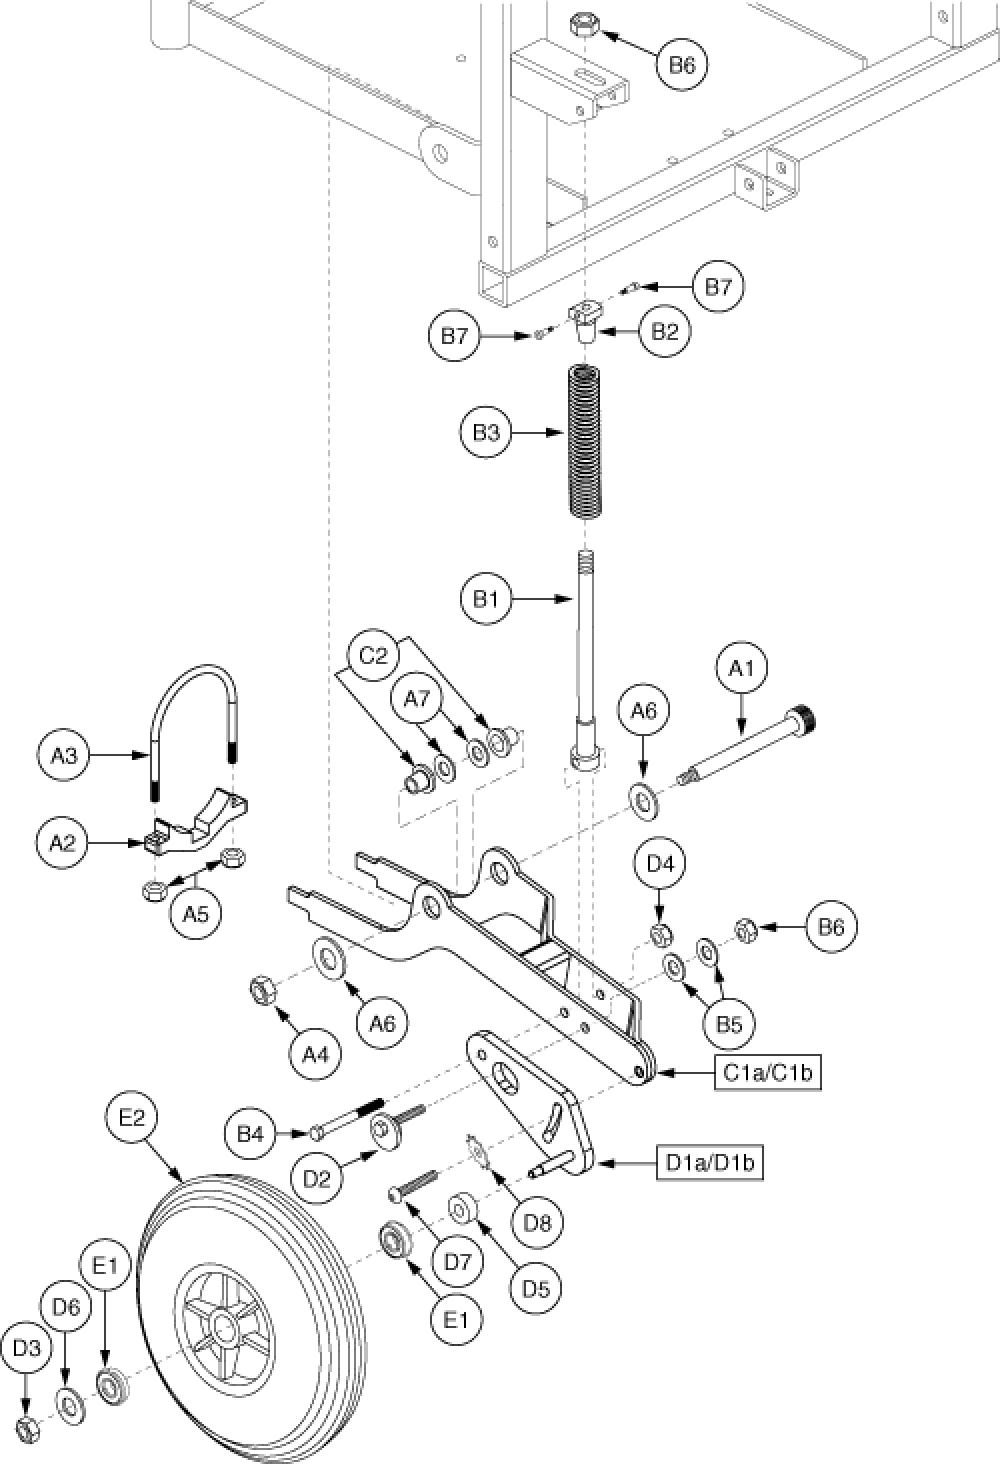 Anti-tip Assembly - E679, Synergy Seating parts diagram